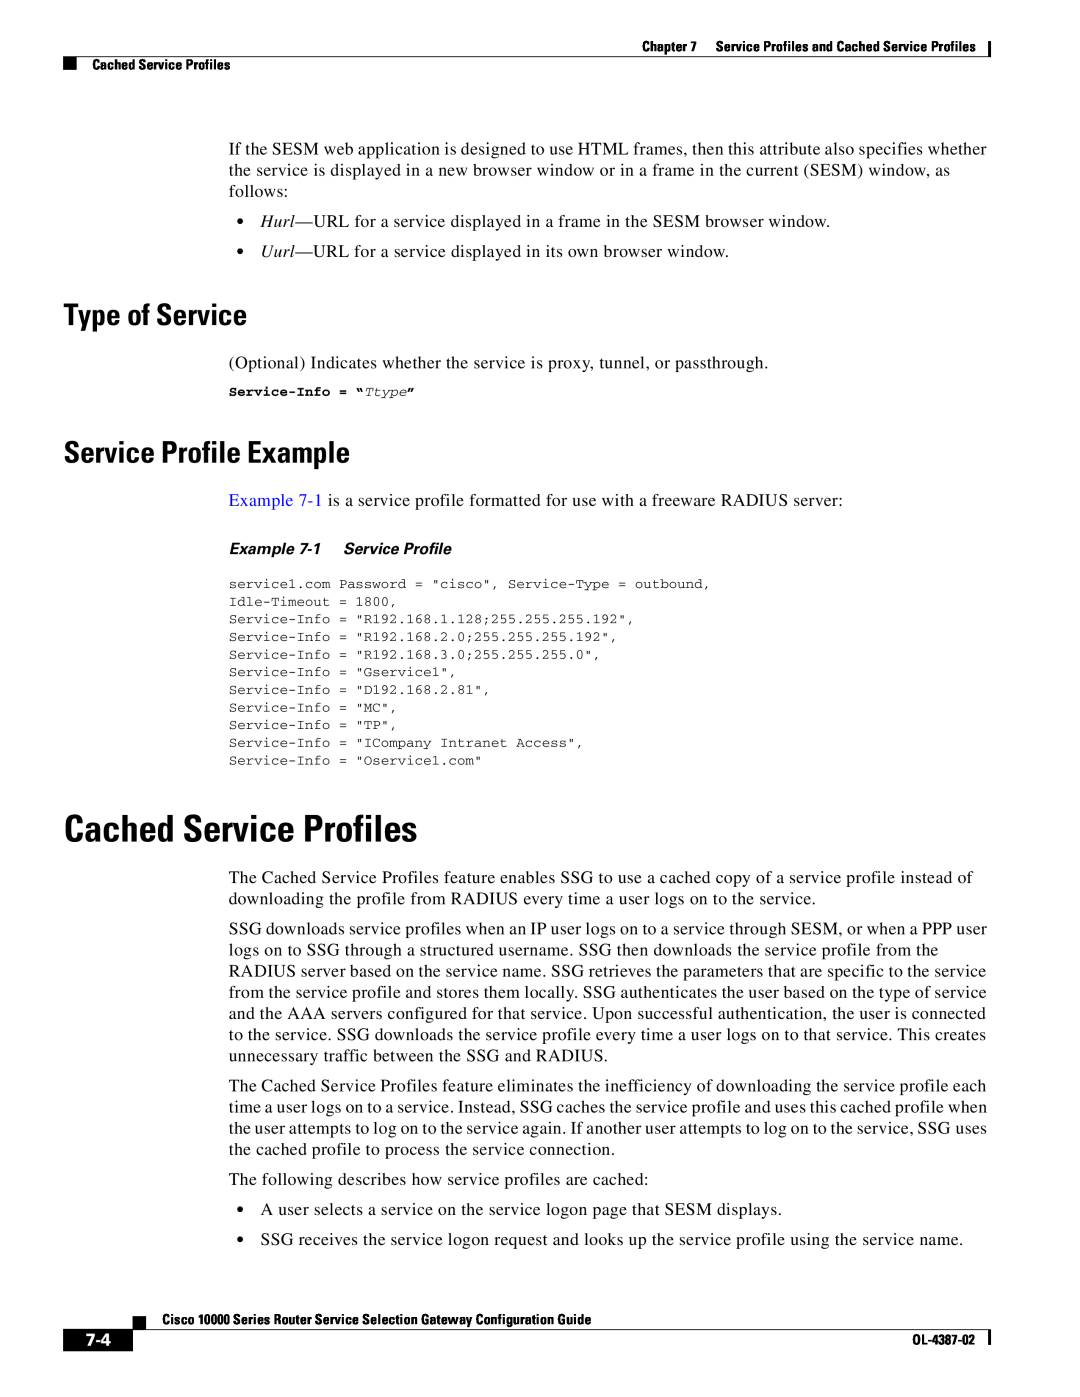 Cisco Systems OL-4387-02 manual Cached Service Profiles, Type of Service, Service Profile Example 